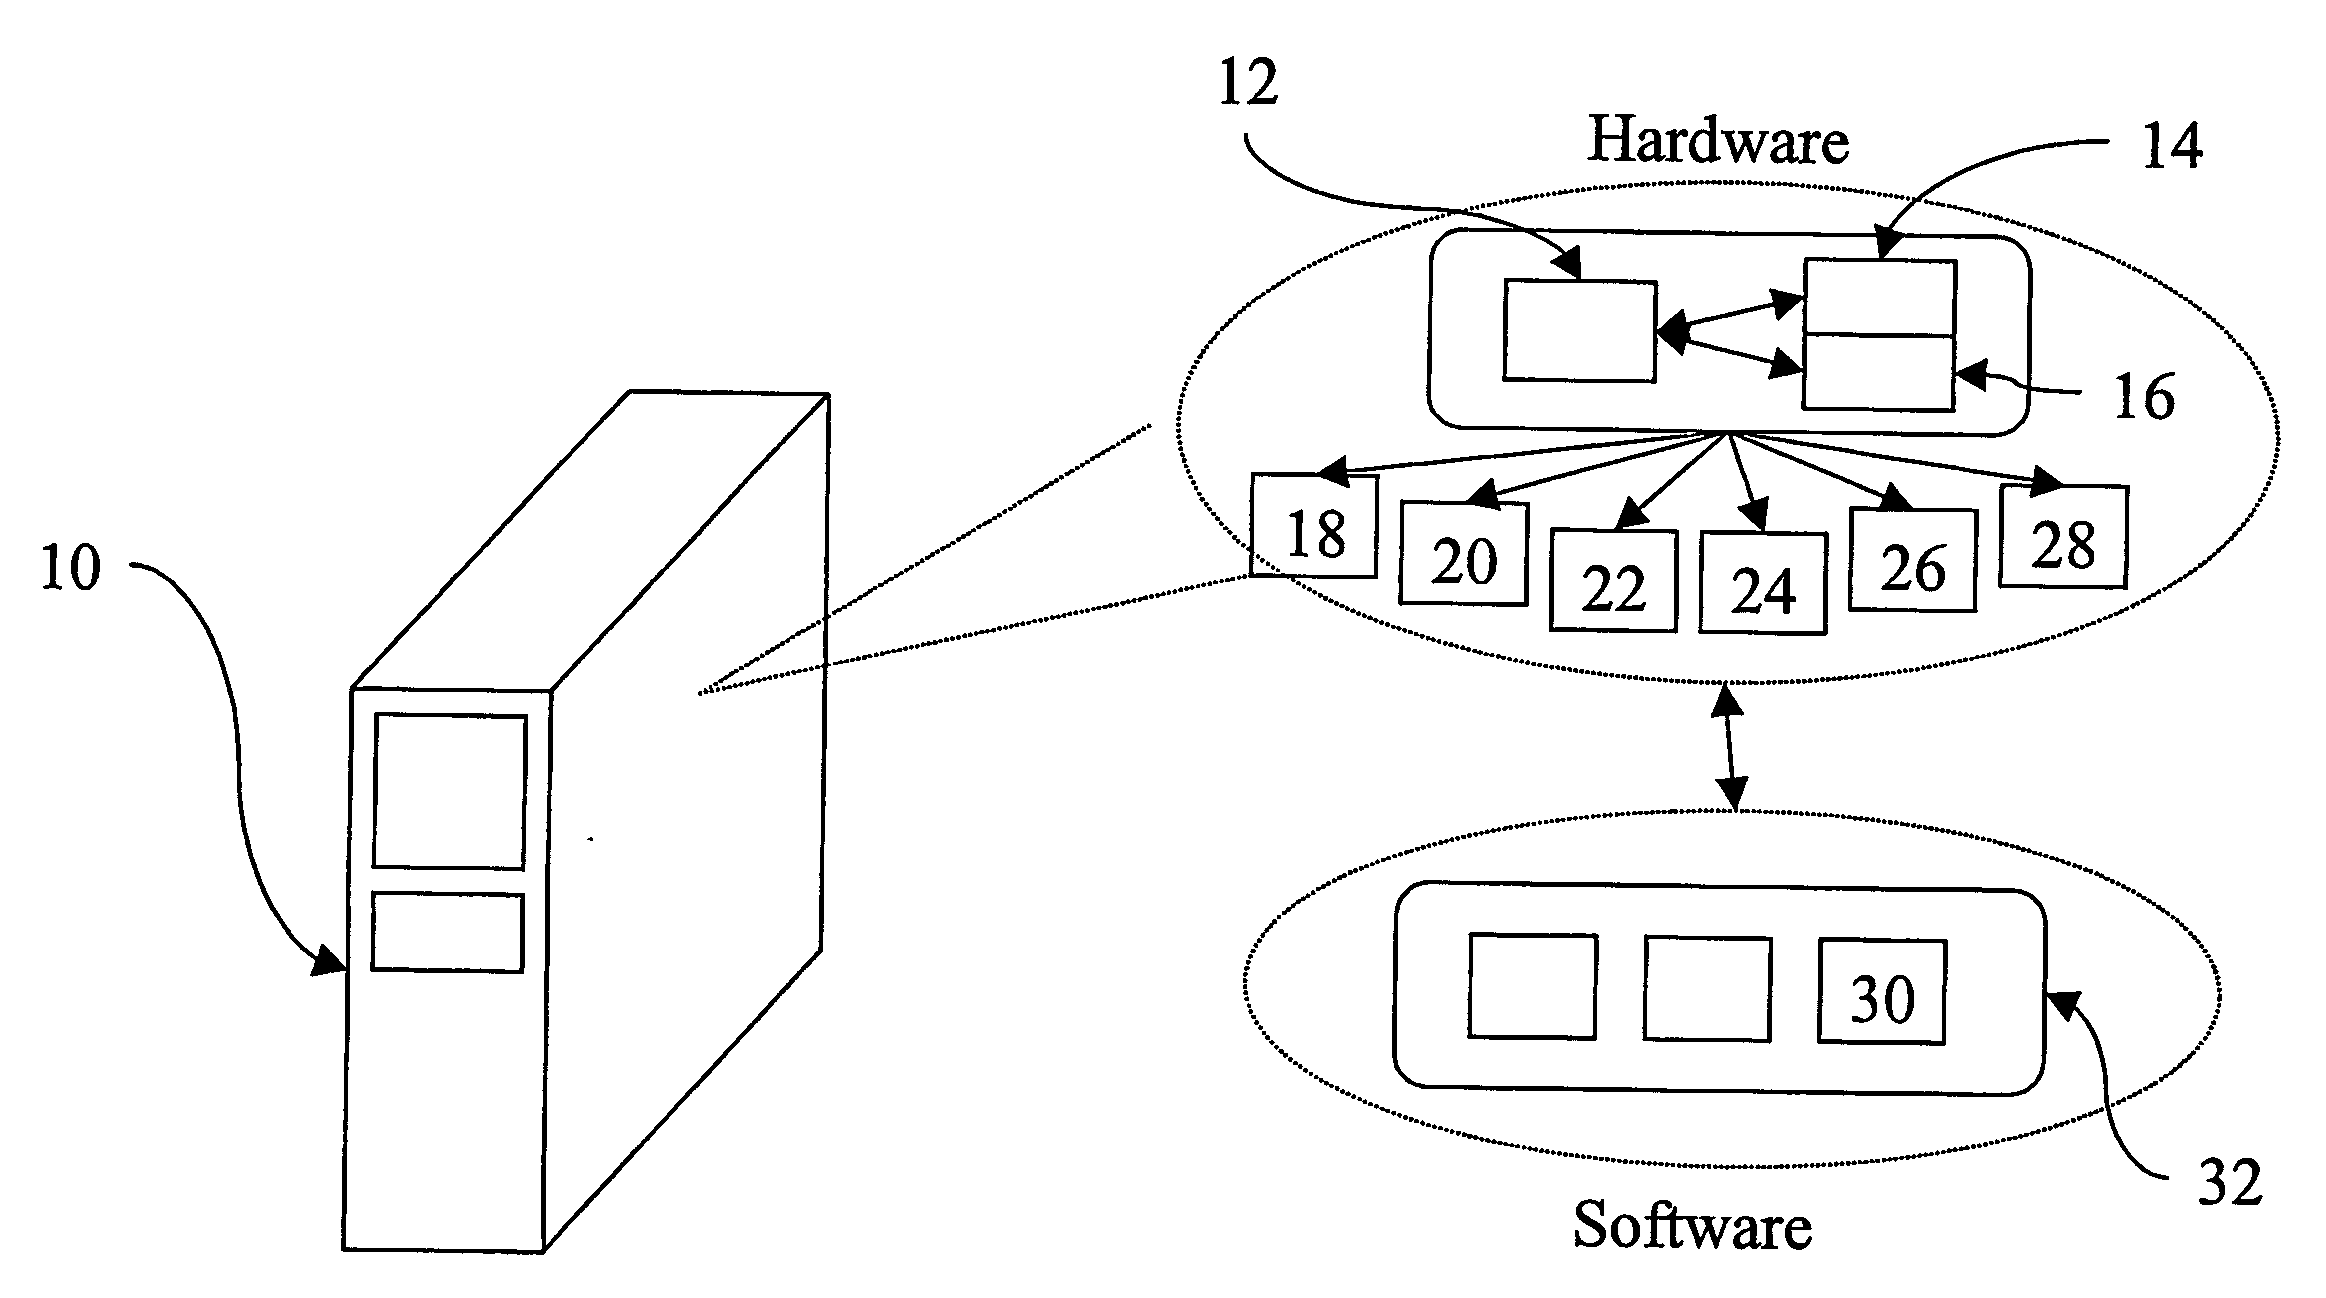 System and method for estimation of computer resource usage by transaction types